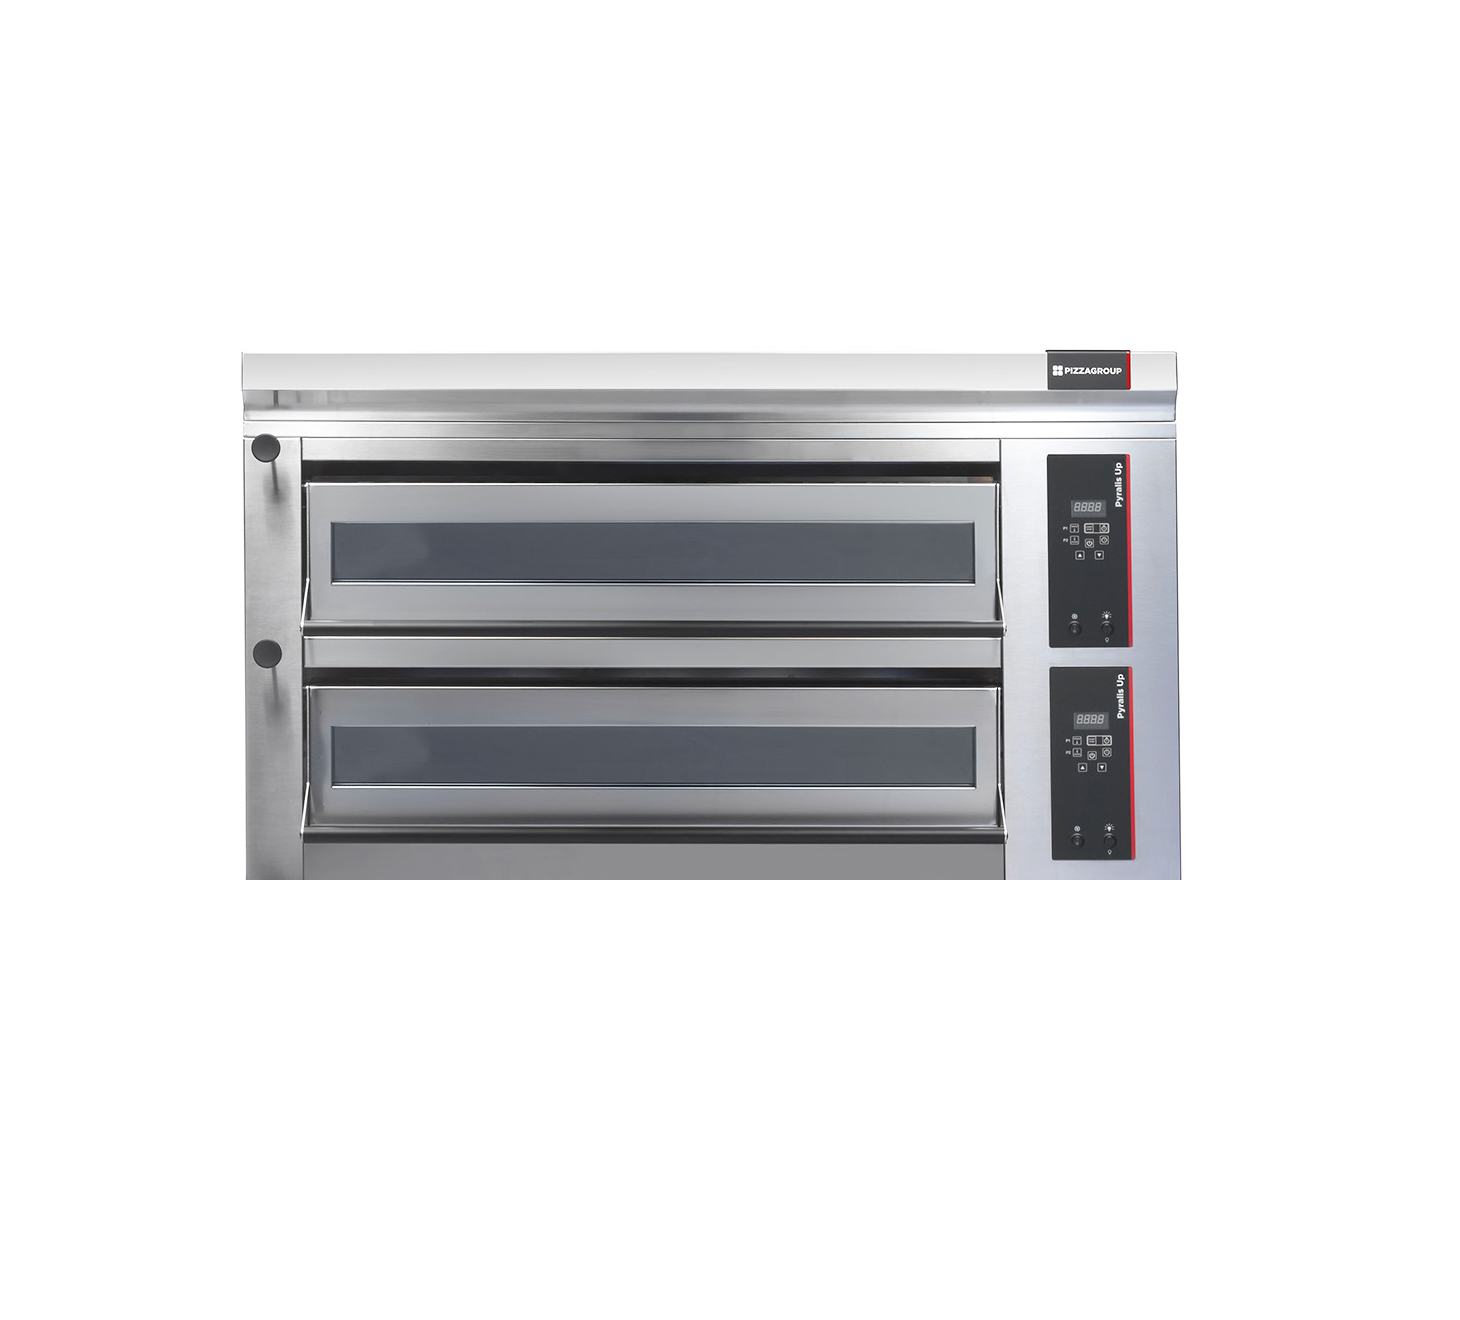 PIZZAGROUP Pyralis Up PY-UP M18 Double Deck Electric Pizza Oven